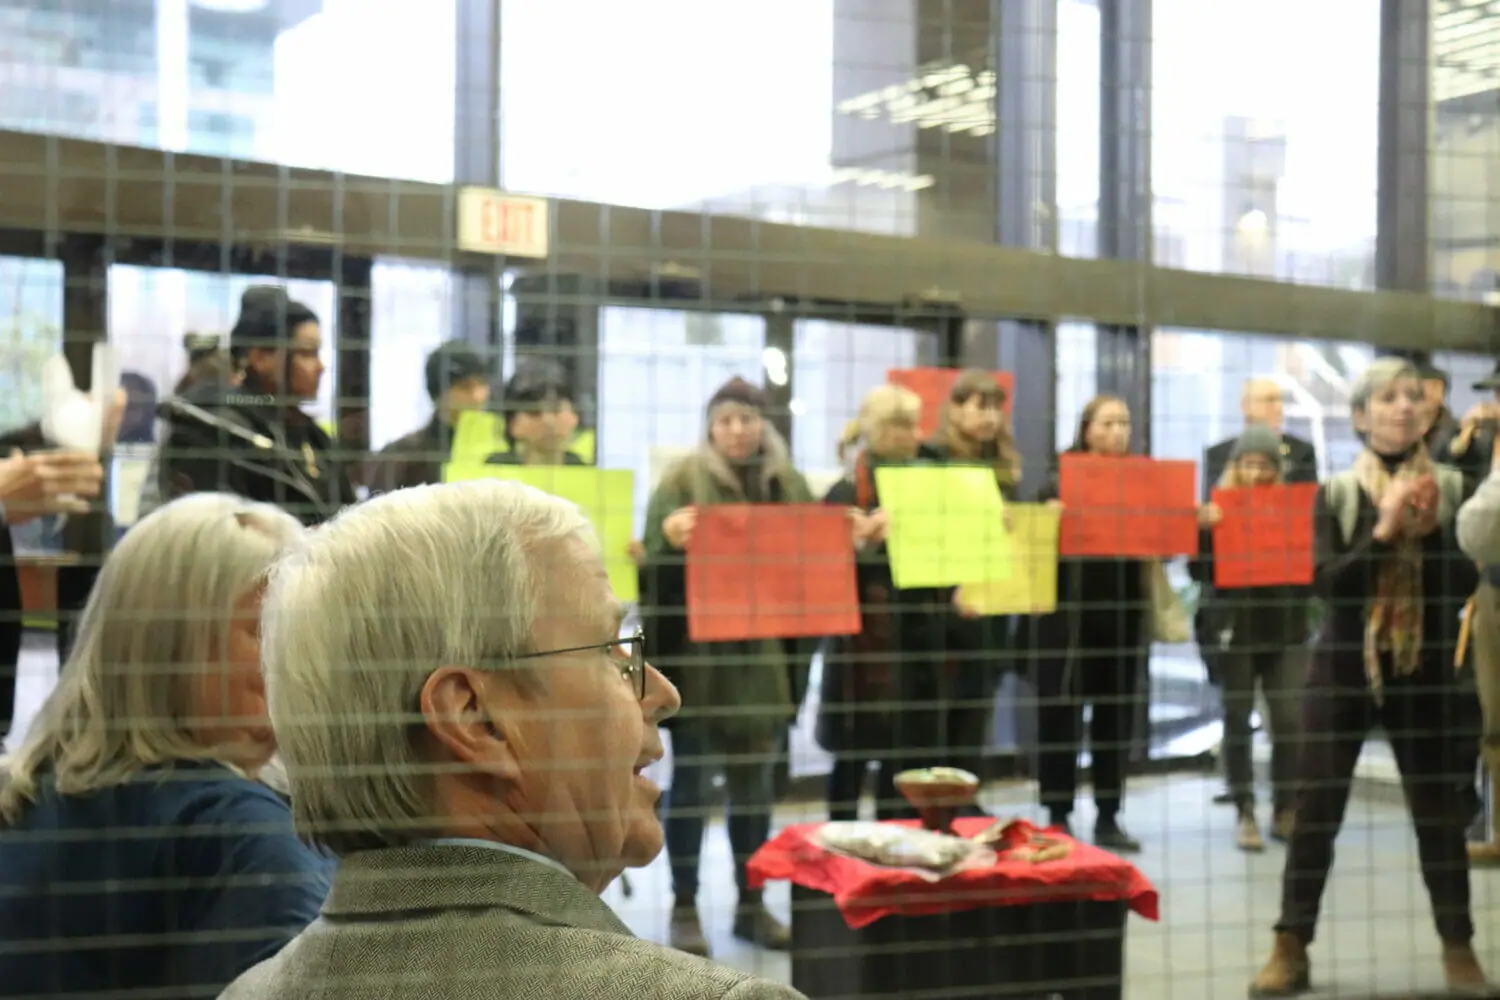 In this image: MacKinnon sits down after his speech, students hold signs in front of him.